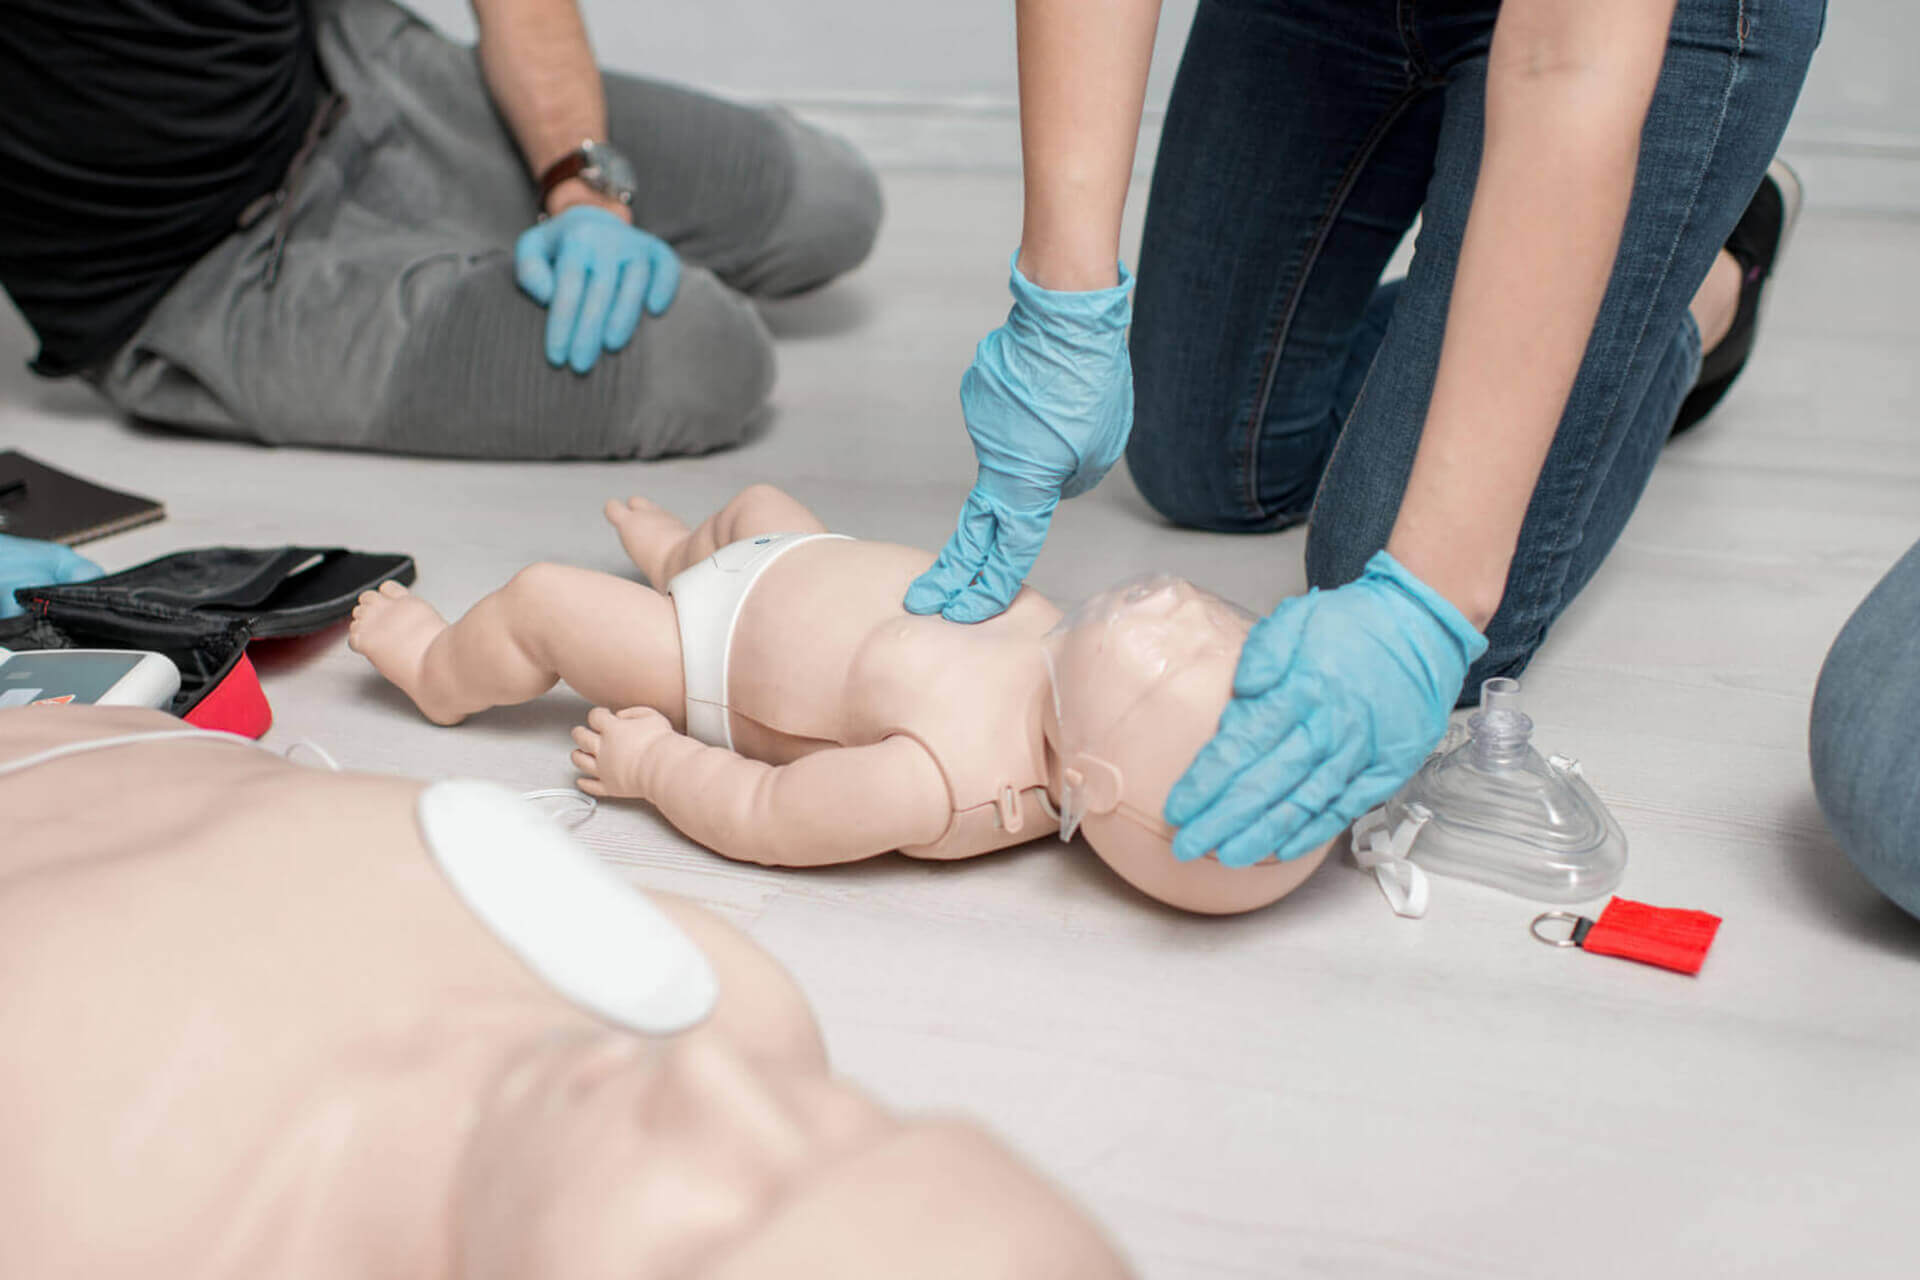 Cpr and First Aid using Vistelar Principals for Proxemics